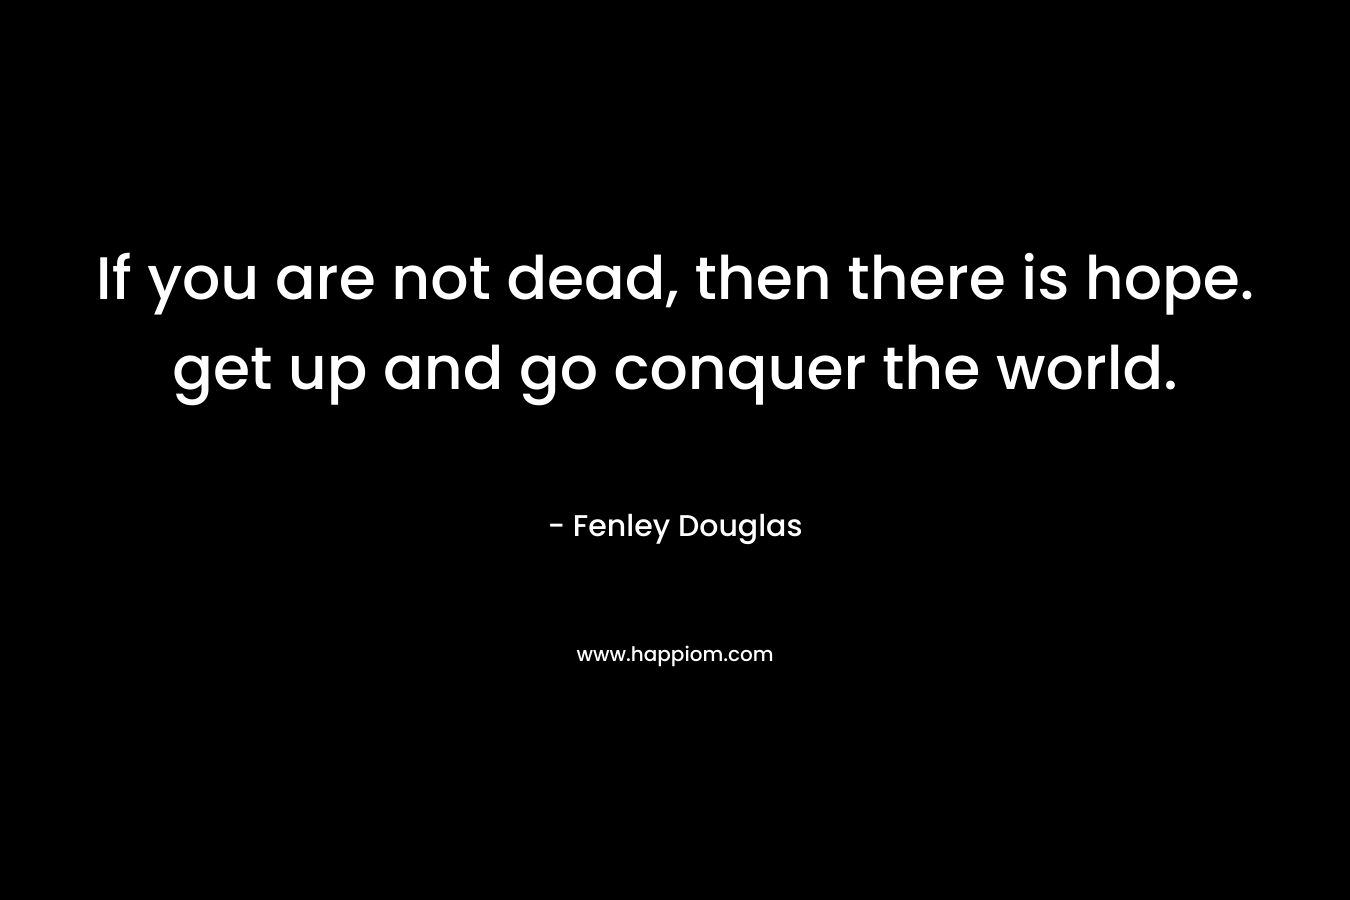 If you are not dead, then there is hope. get up and go conquer the world. – Fenley Douglas